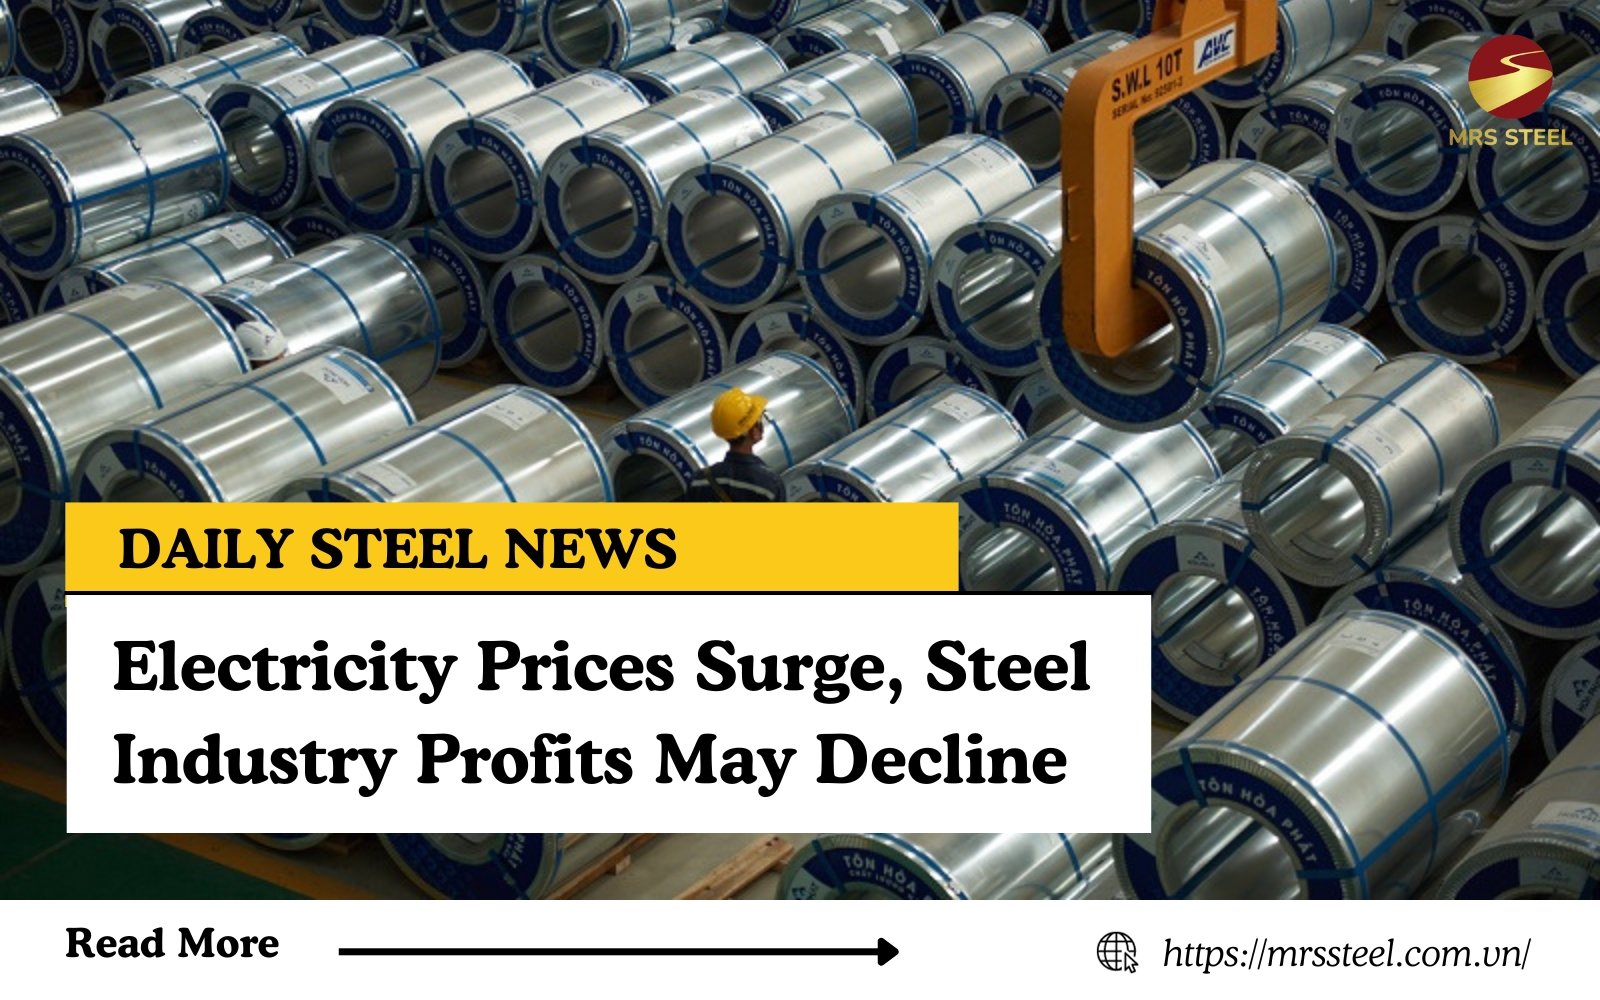 Electricity Prices Surge, Steel Industry Profits May Decline